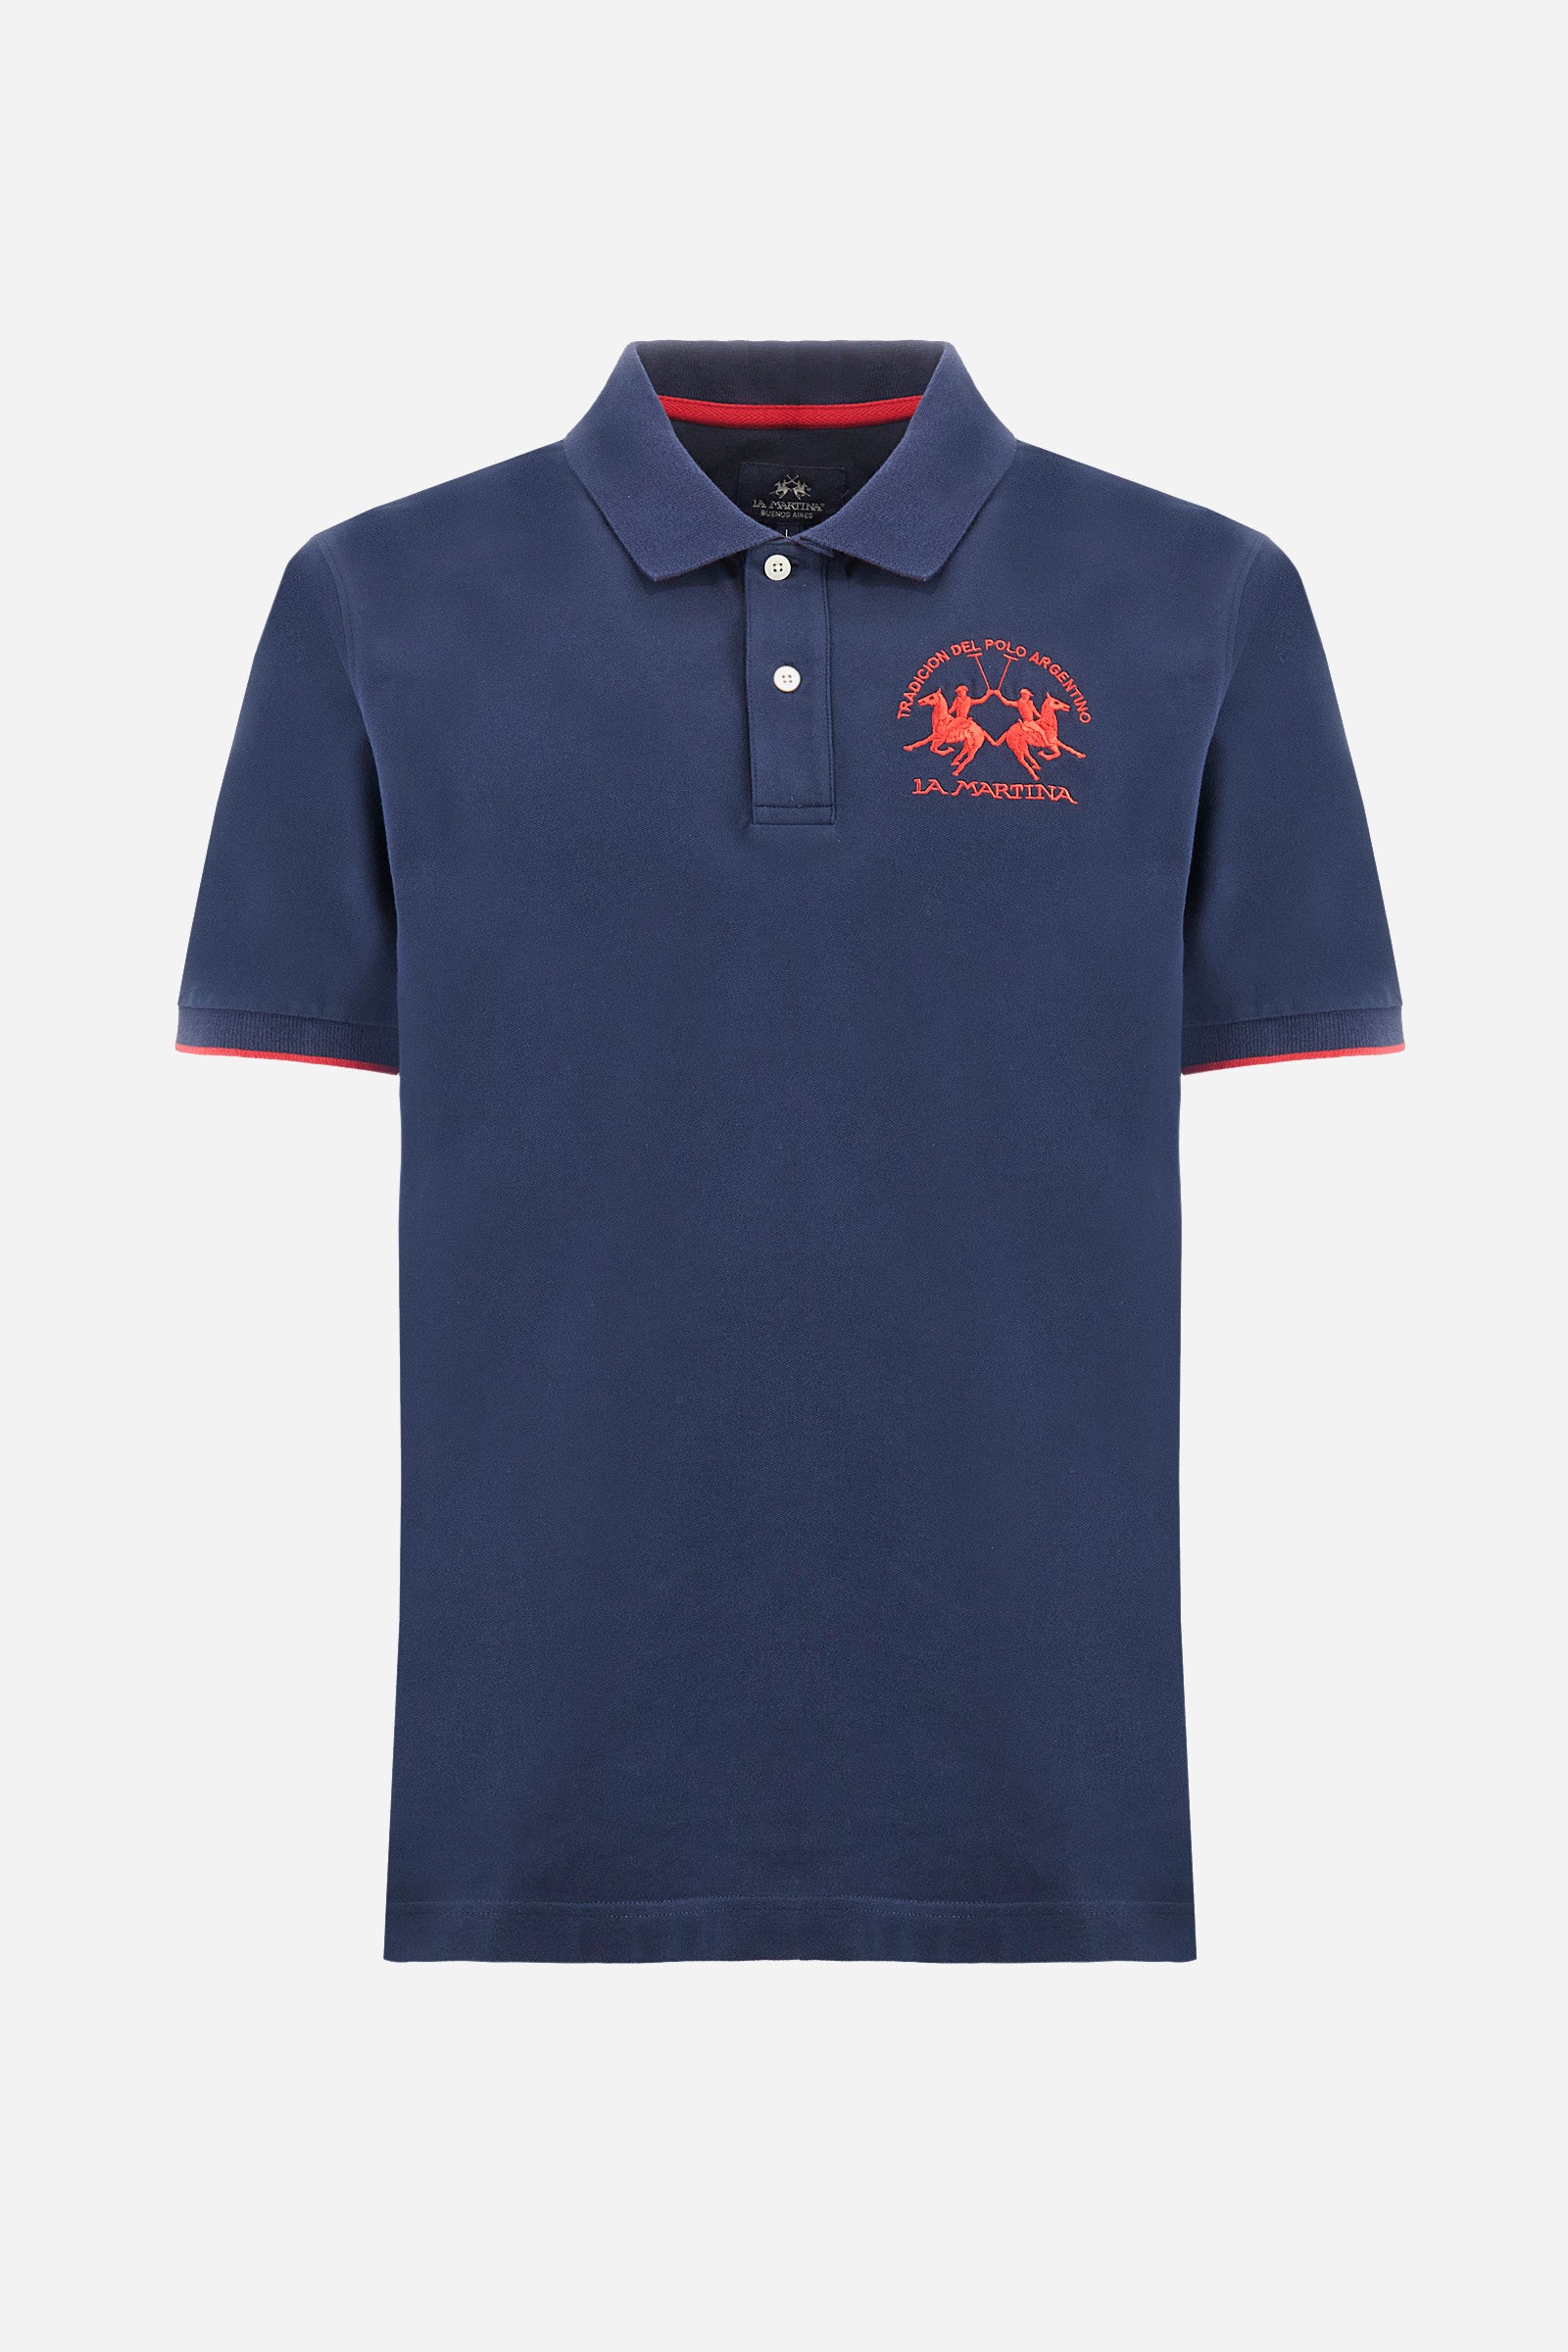 Men's polo shirt in a regular fit - Miguel